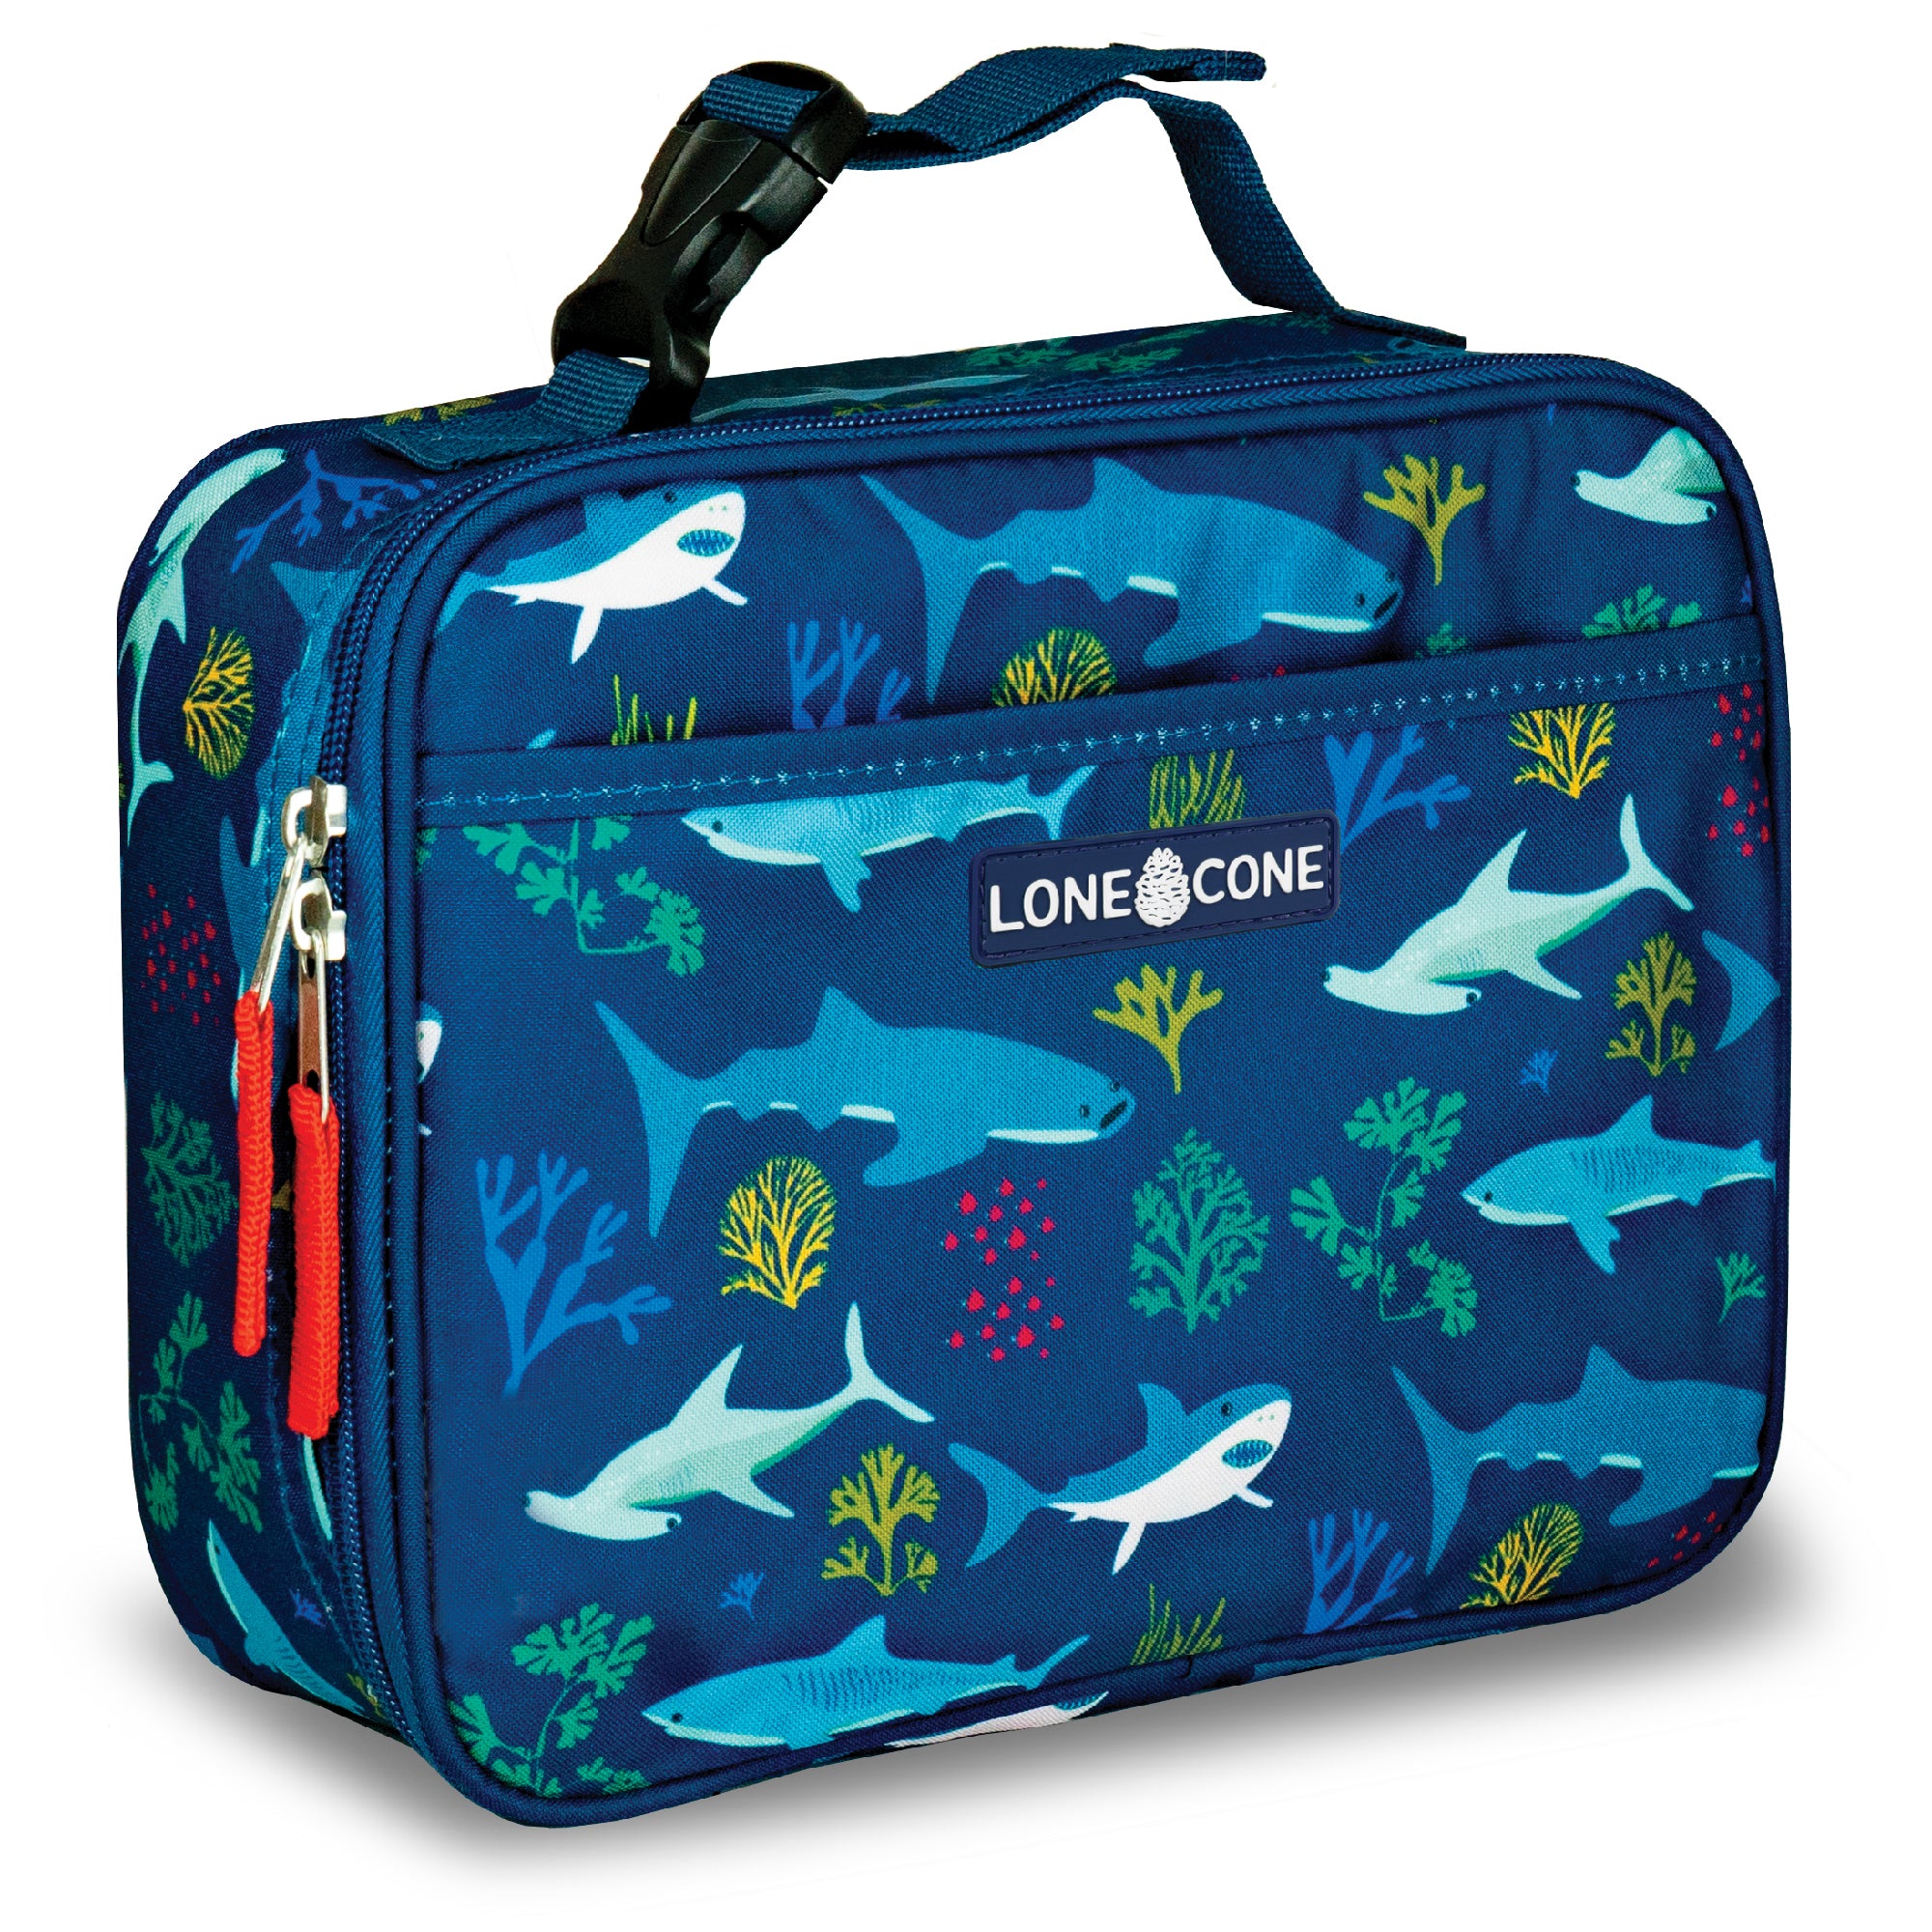 Shark Attack X-Large Lunchbox